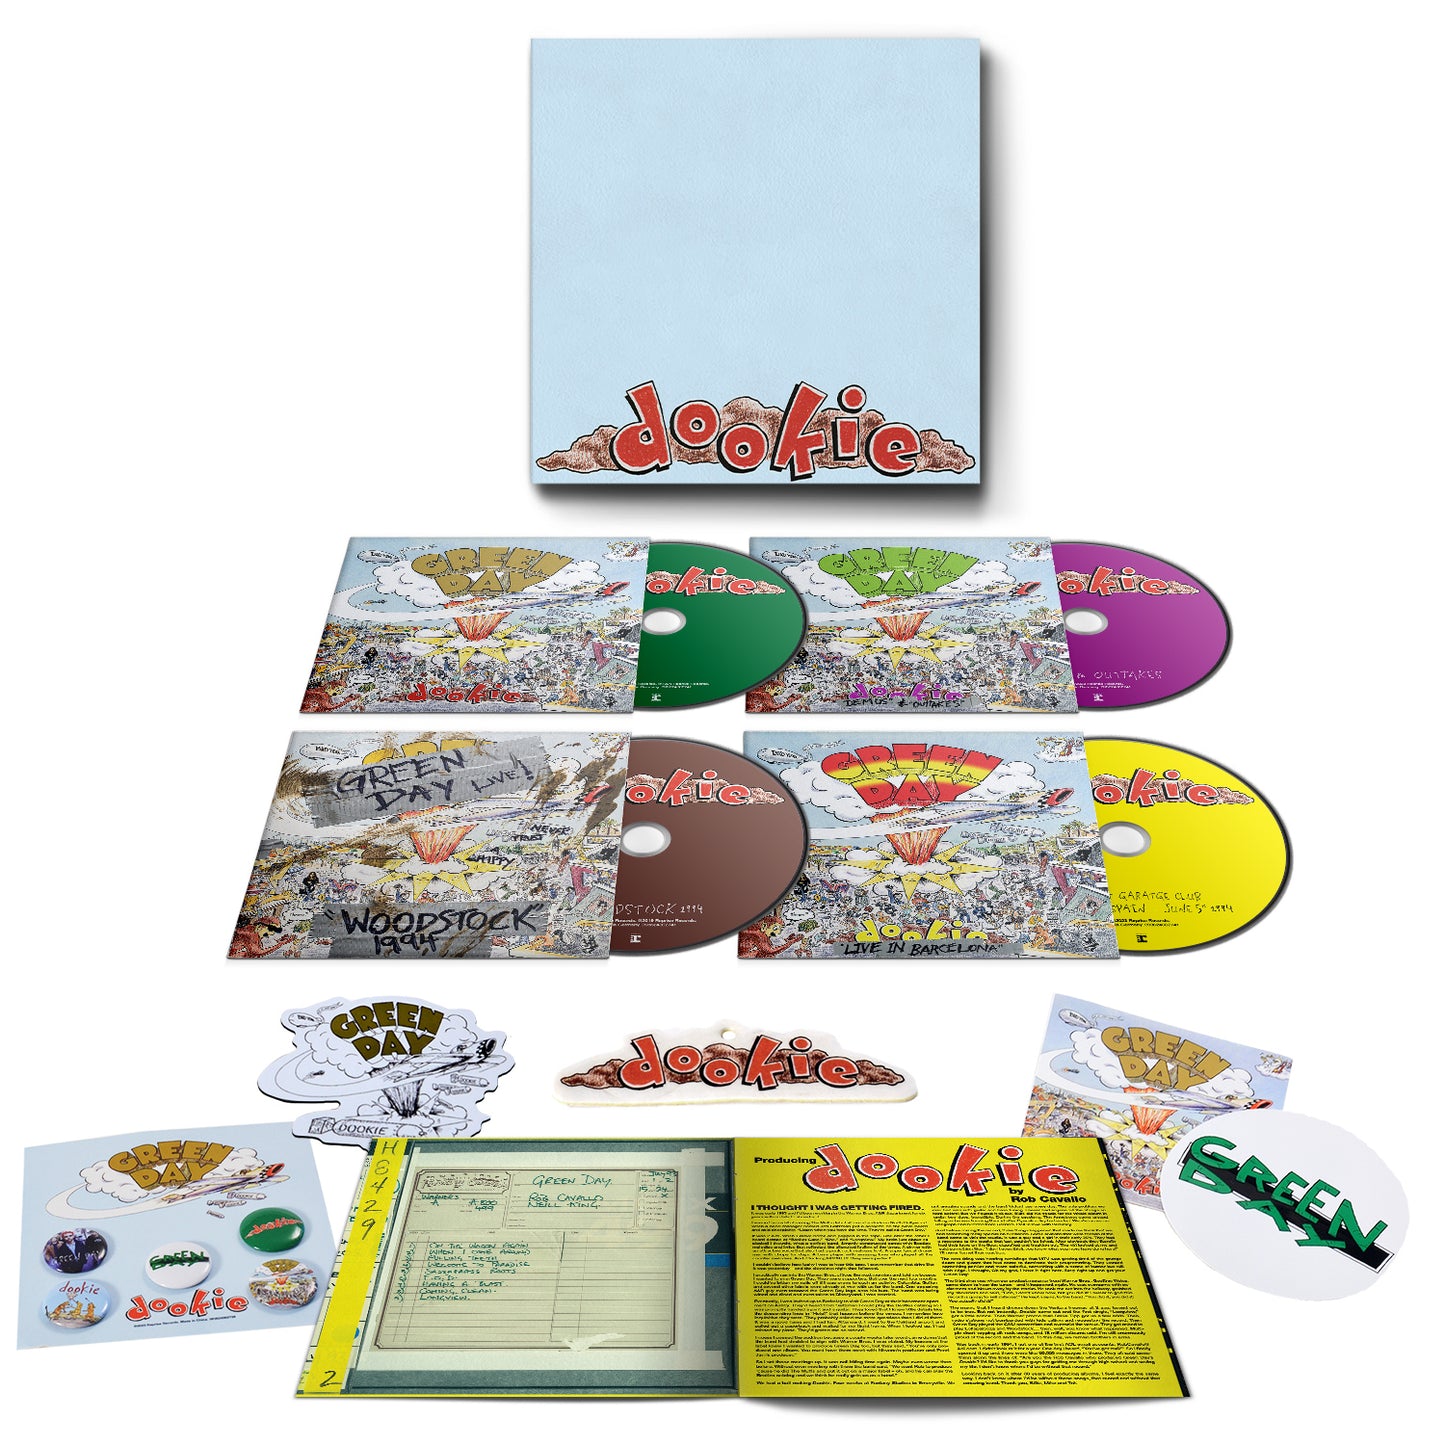 PRE-ORDER: Green Day "Dookie" 30th Anniversary Box Set!